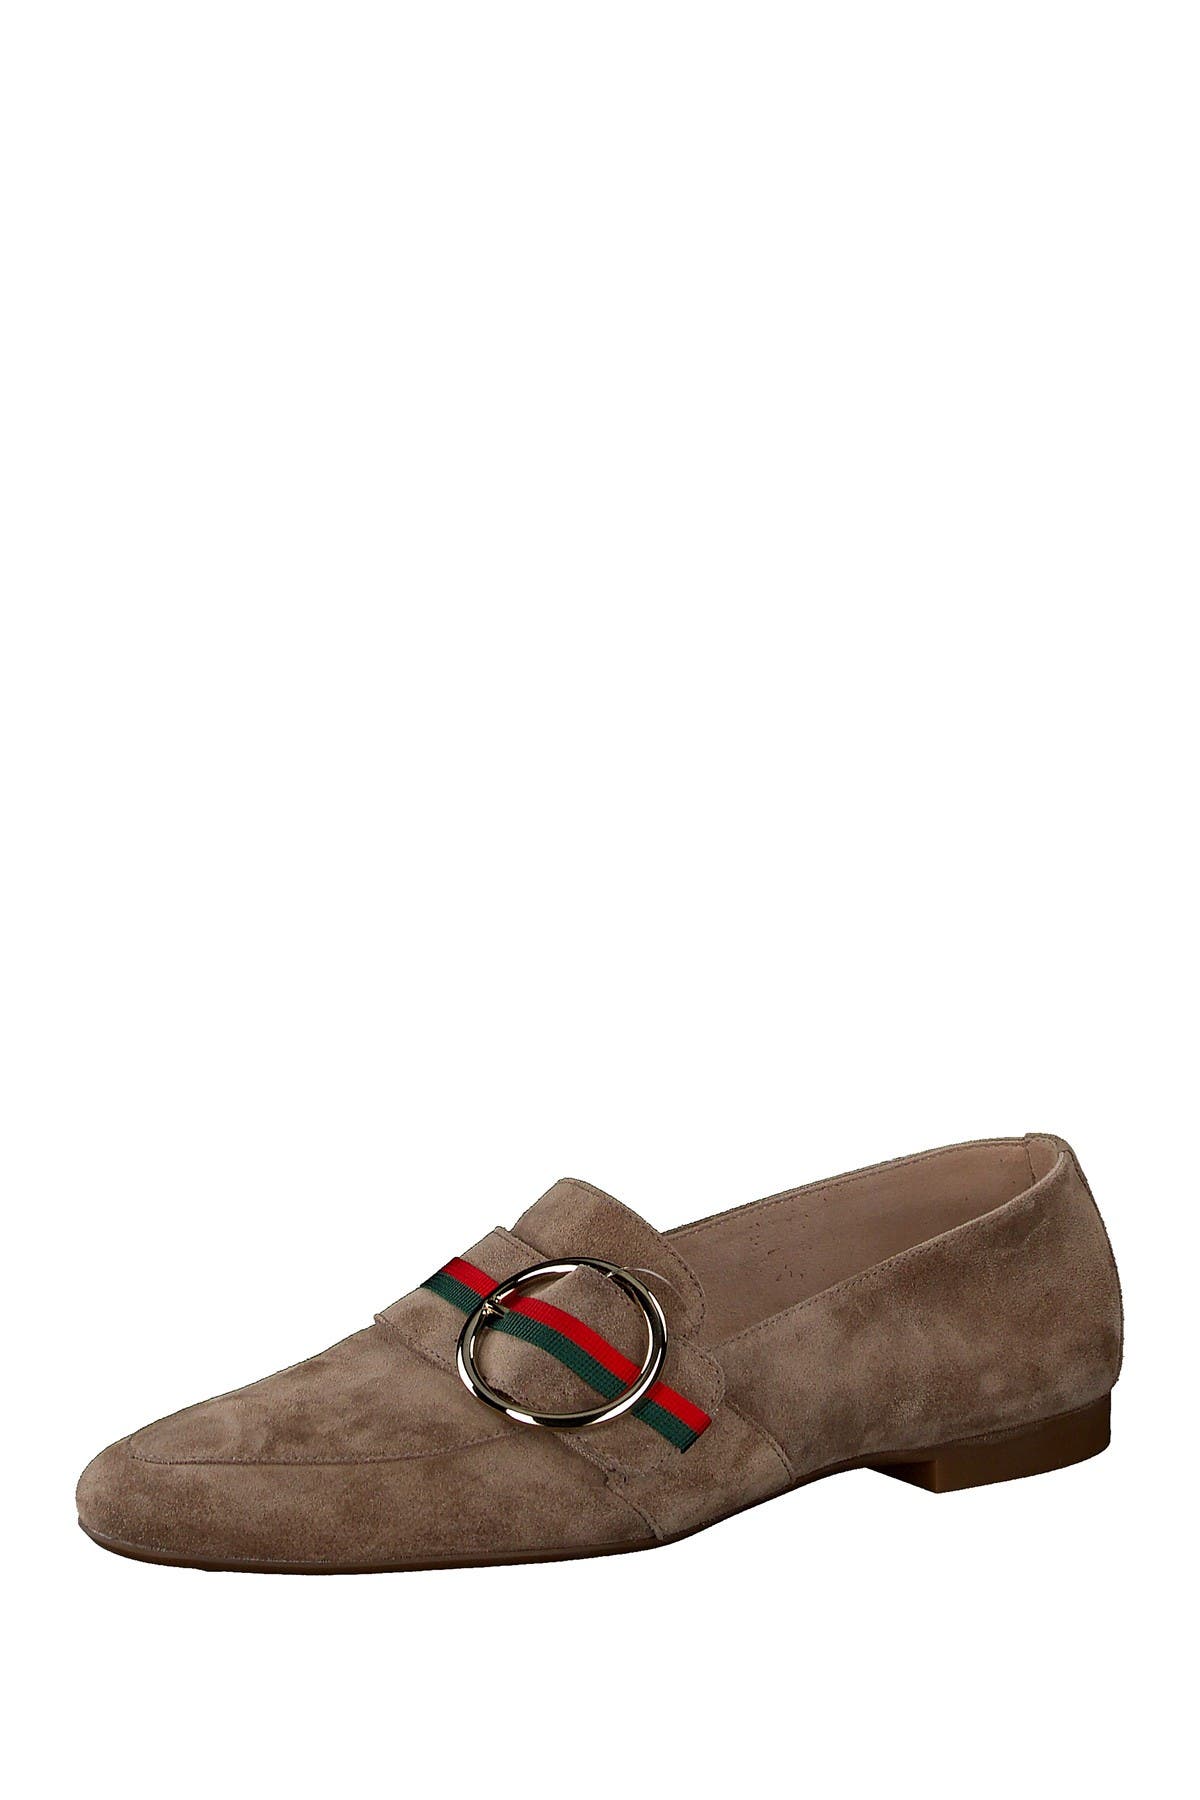 Paul Green | Banner Buckle Suede Loafer 